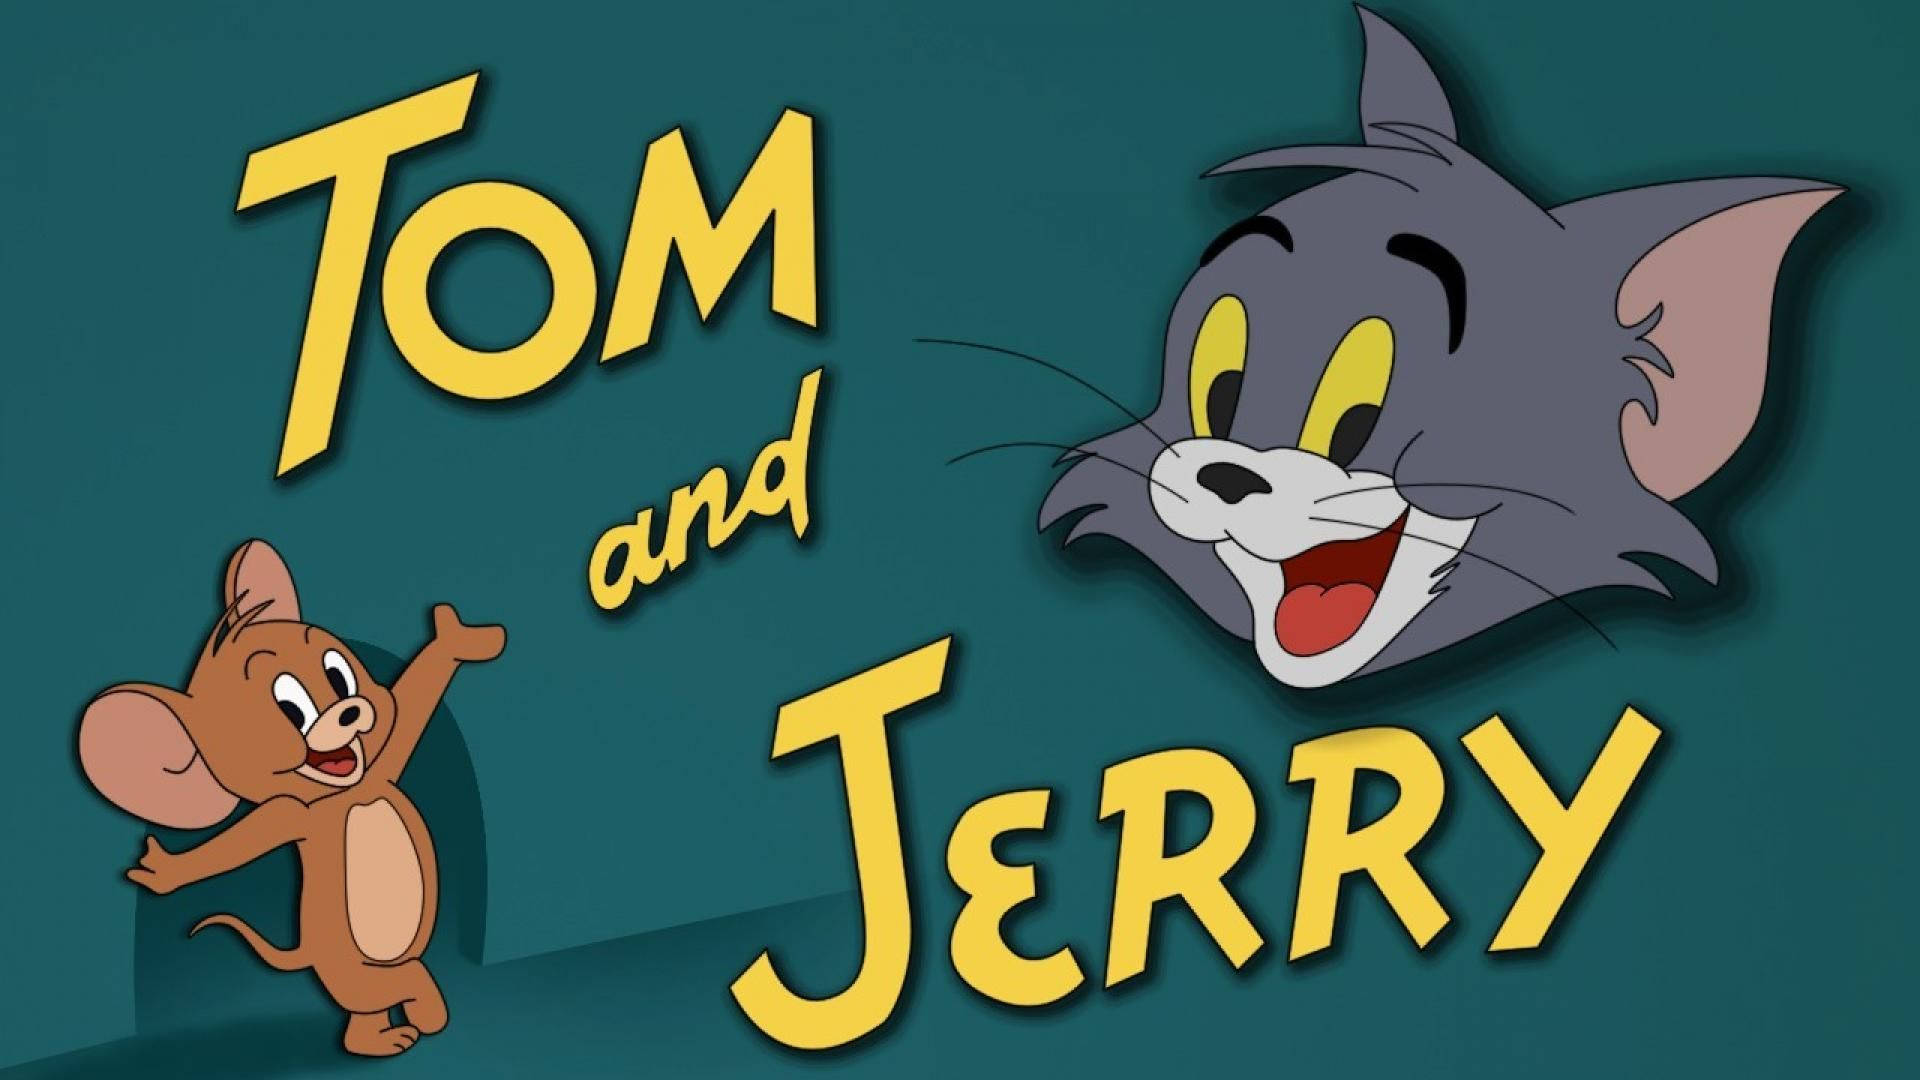 Tom Cat With Little Mouse Jerry